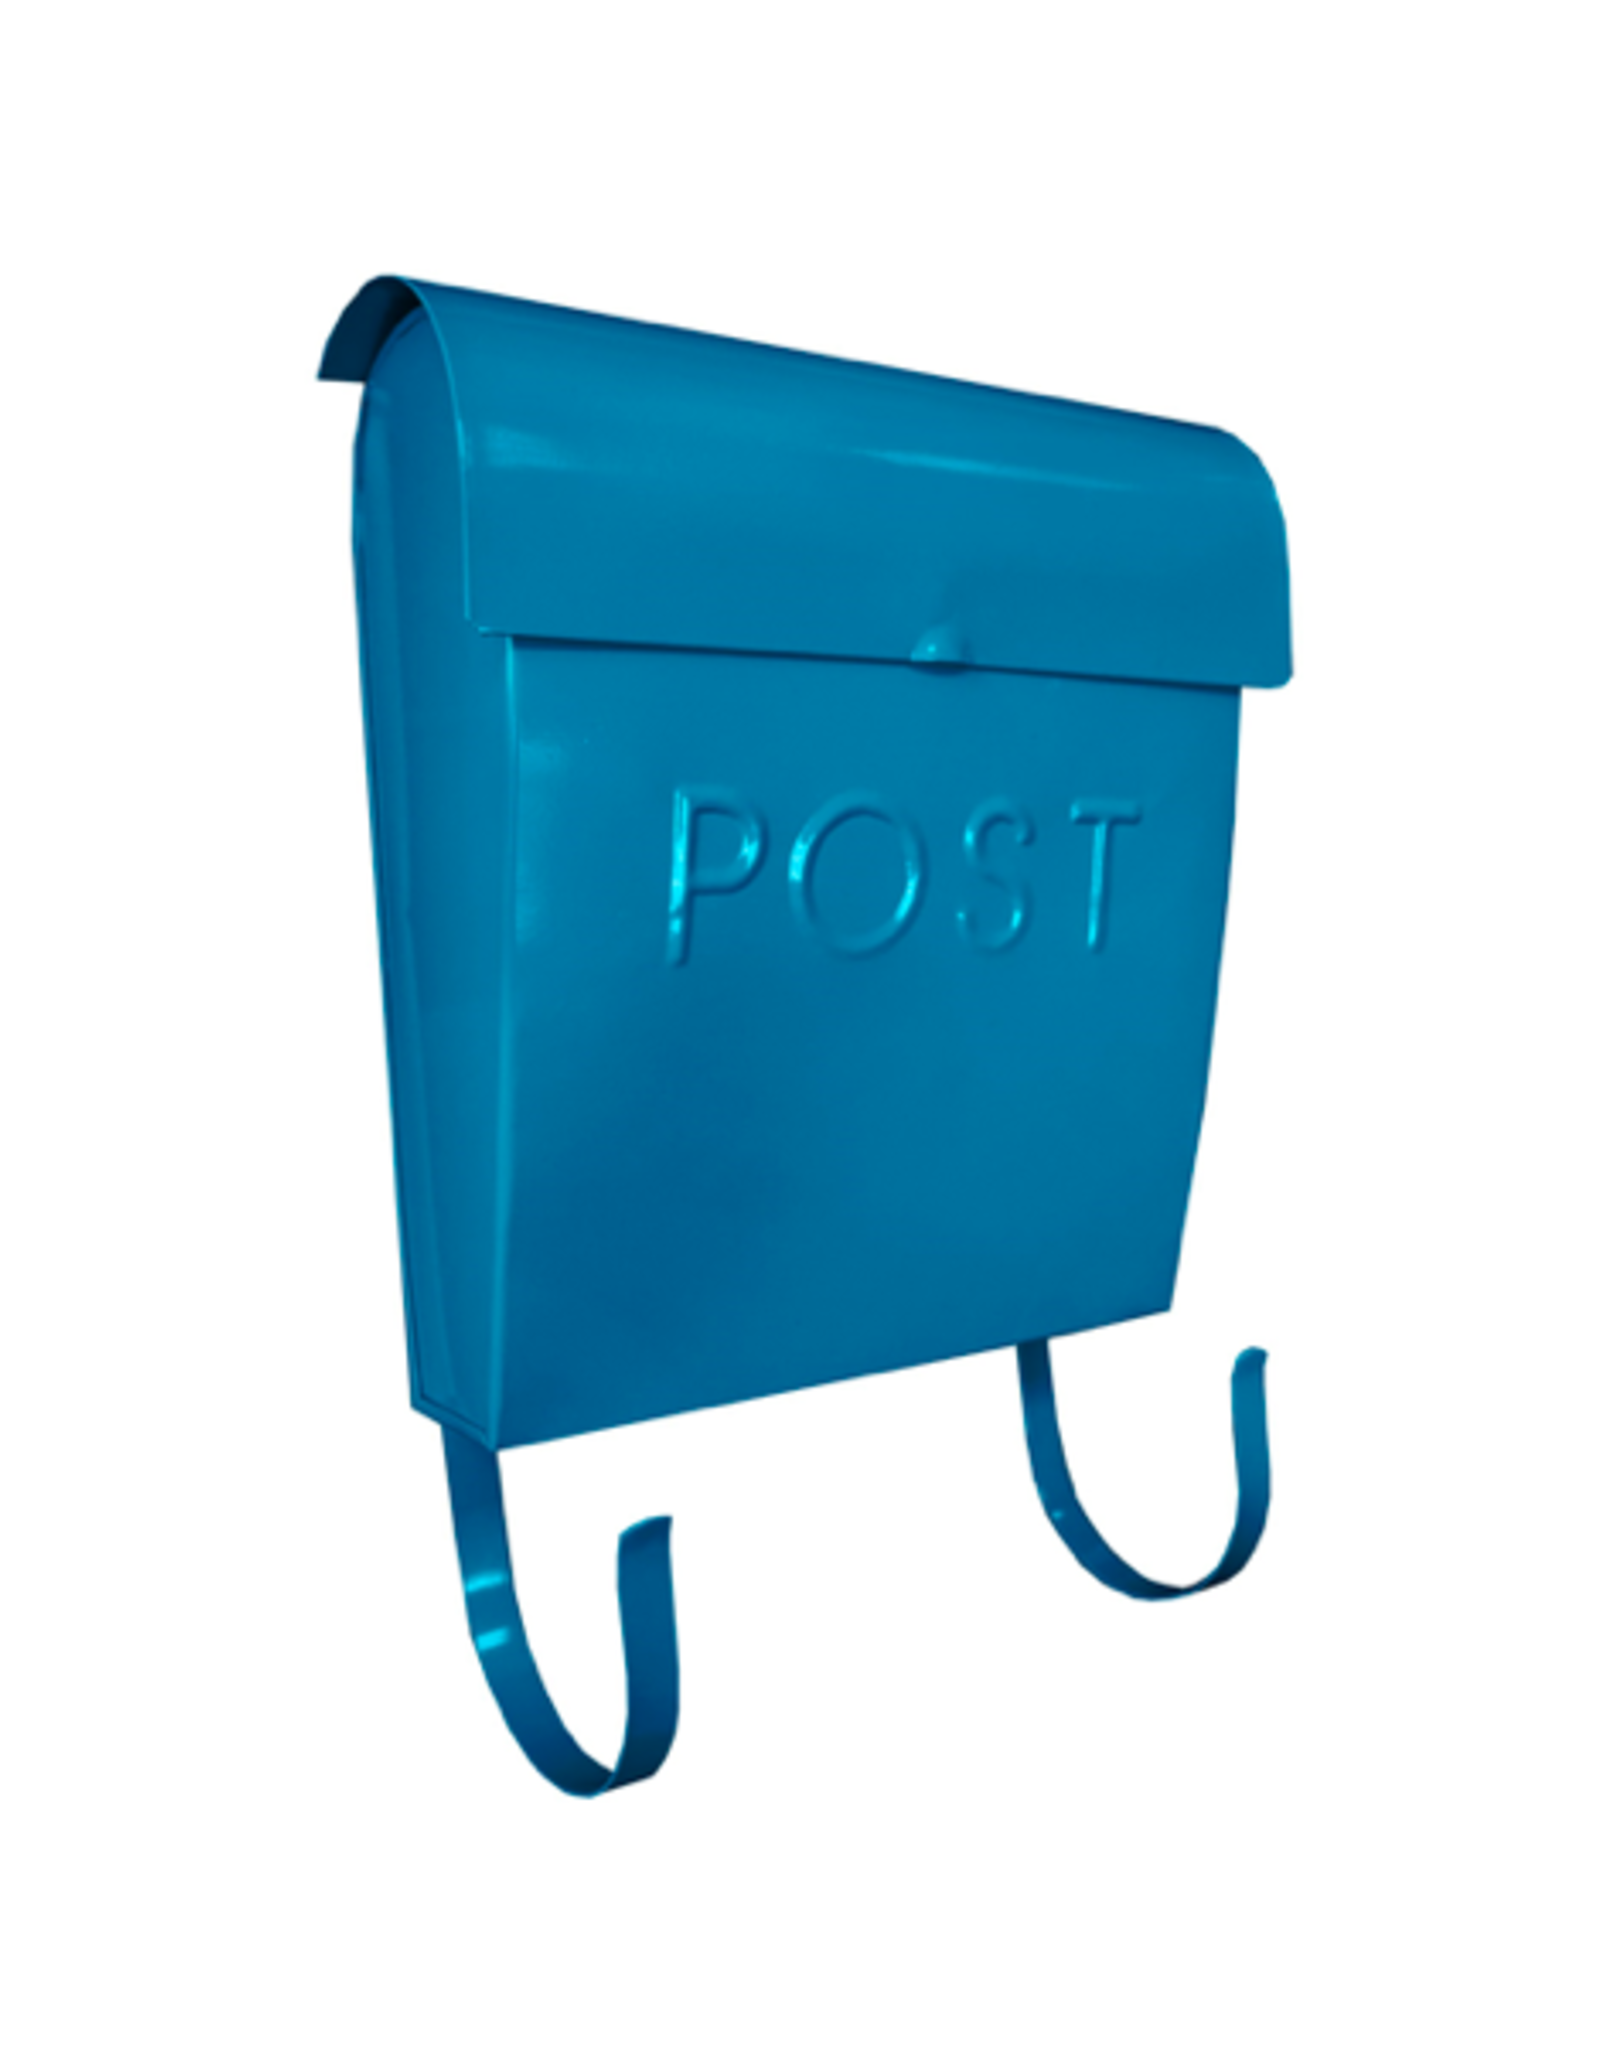 NTH - Mailbox with Arms / European, Azure